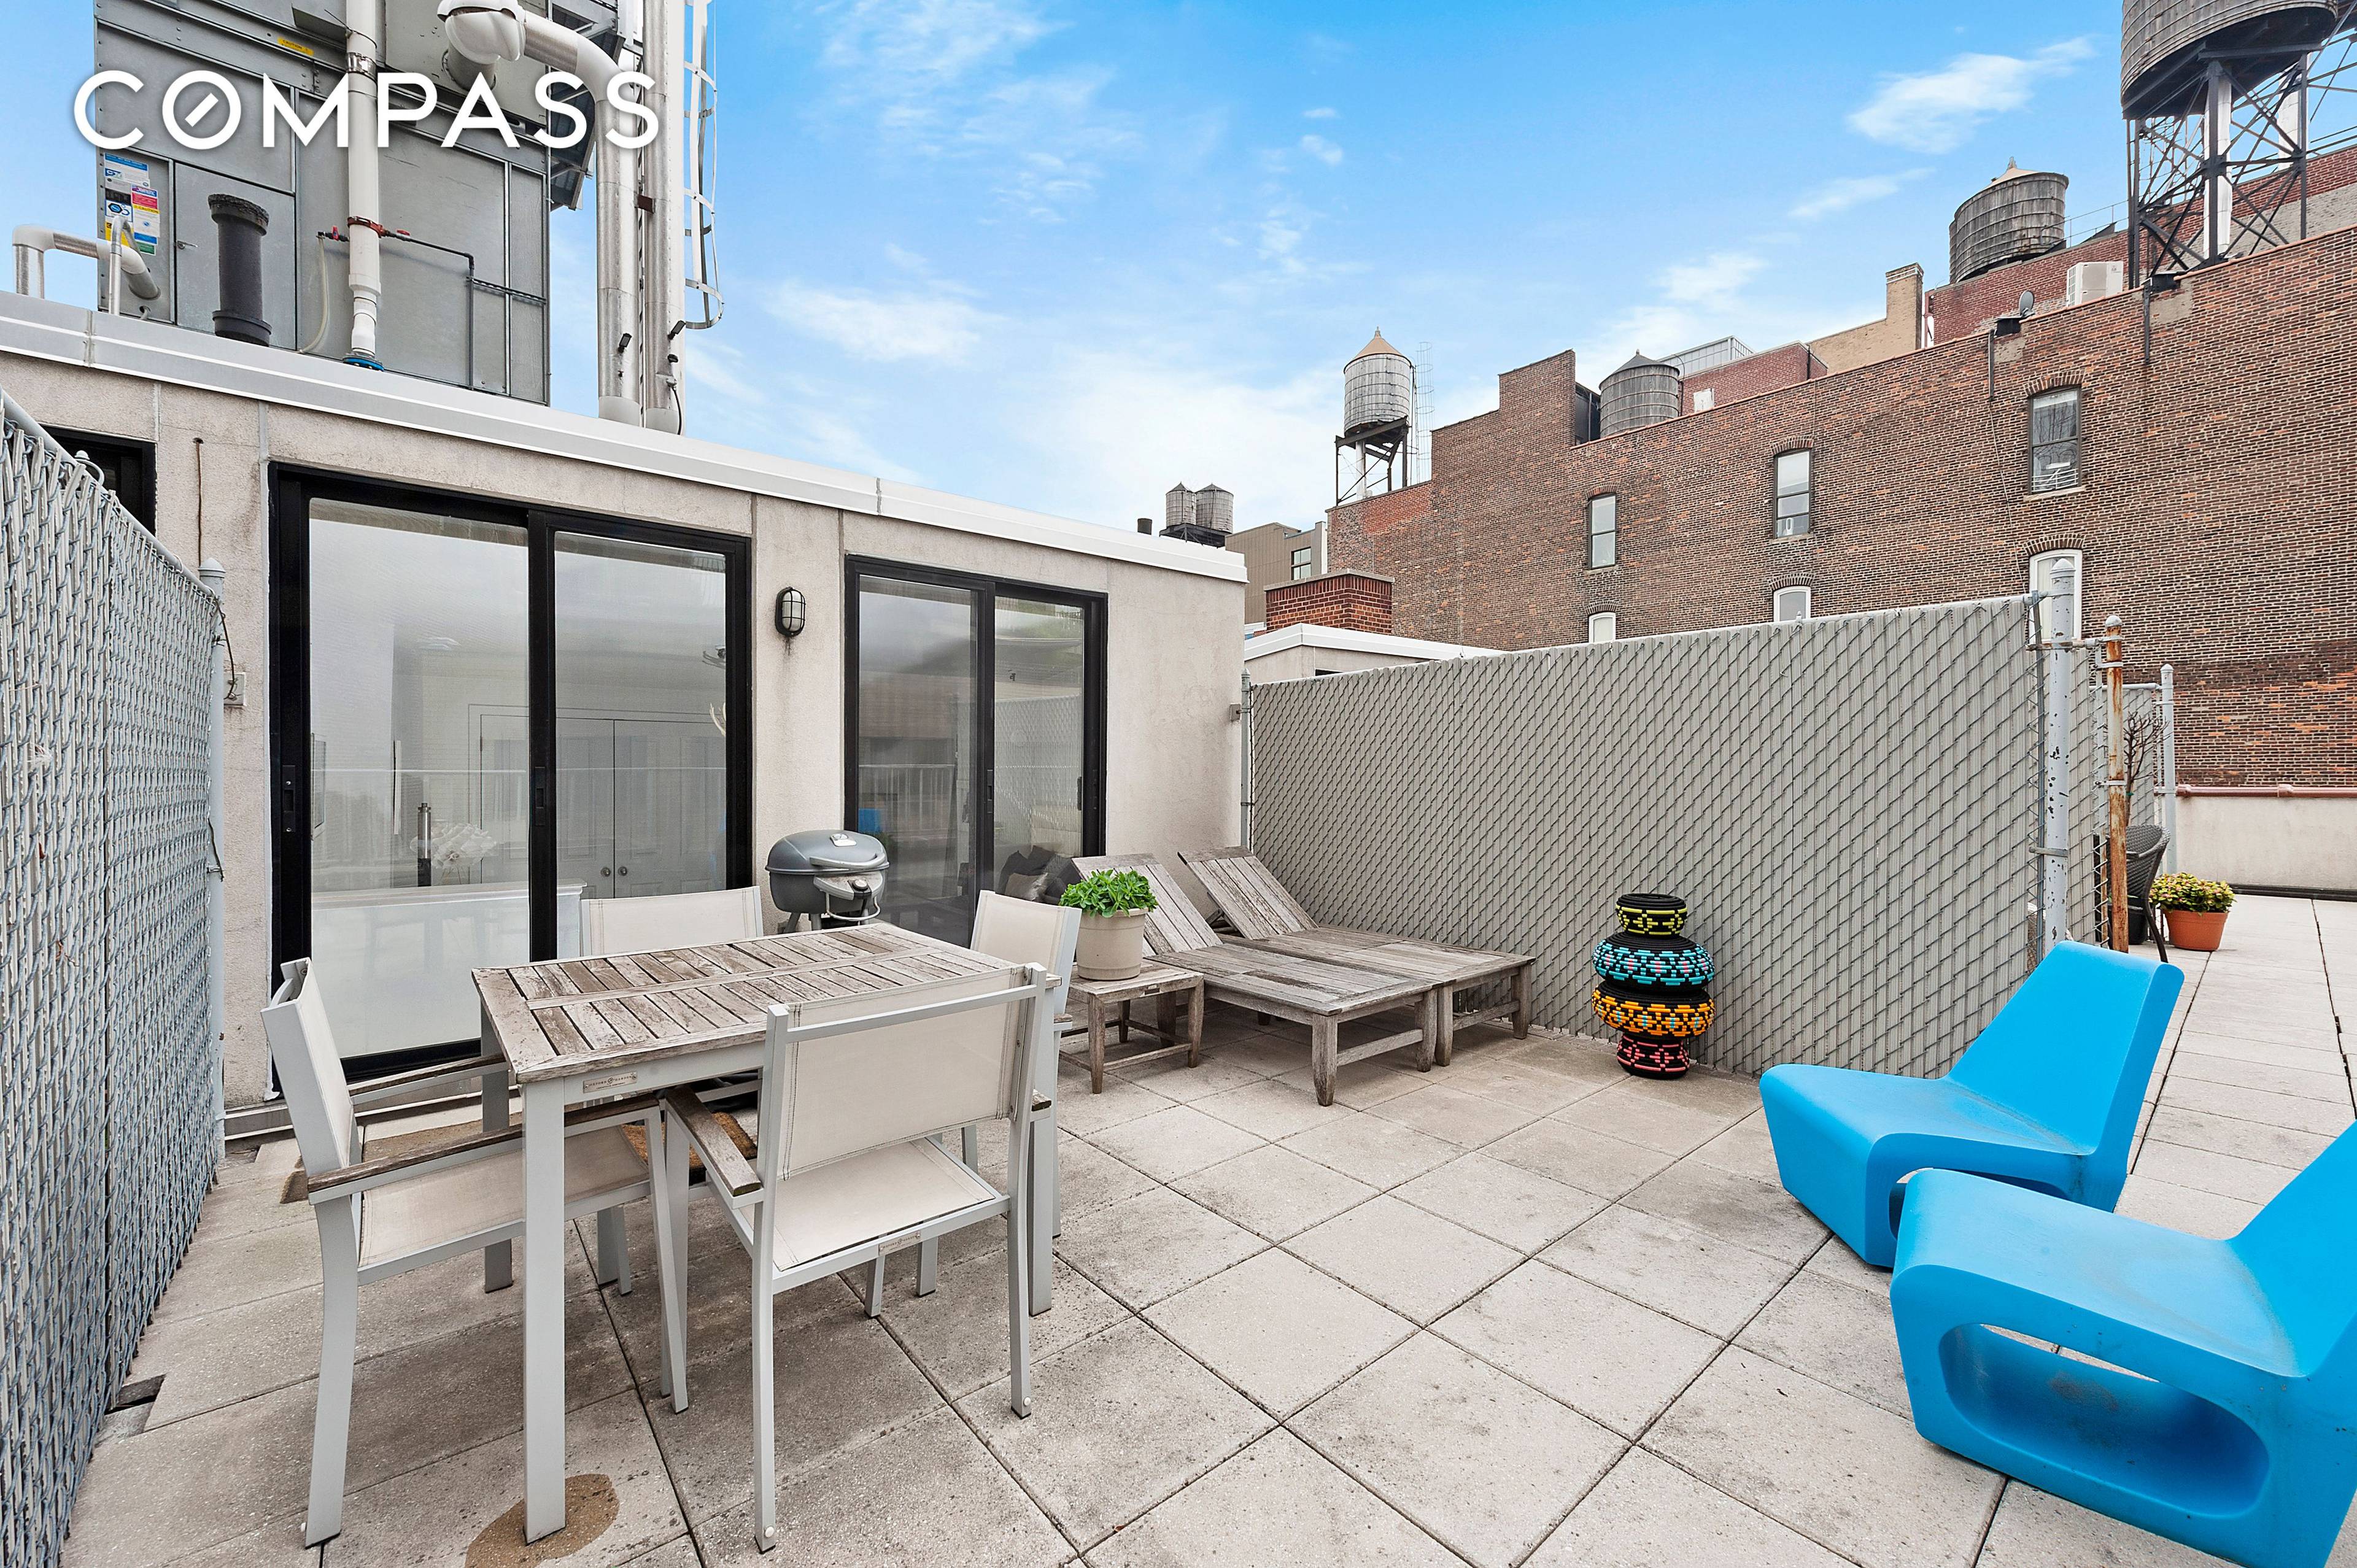 Clean design, elegant finish, and quality craftsmanship all in perfect balance in this lovely One Bedroom Duplex Penthouse with private terrace.